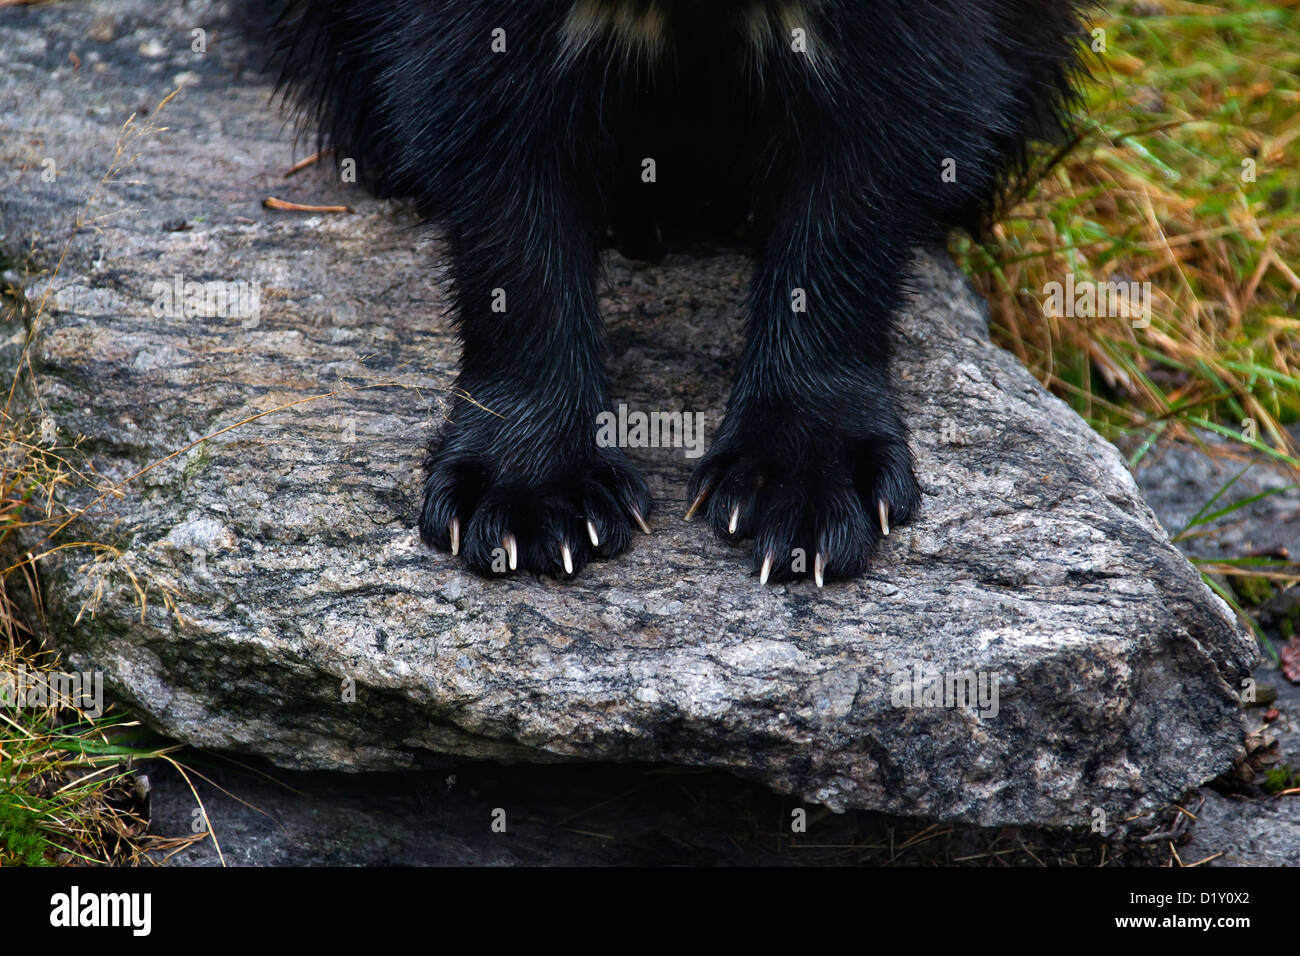 Wolverine (Gulo gulo) close up of front feet, huge paws and claws, Sweden, Scandinavia Stock Photo